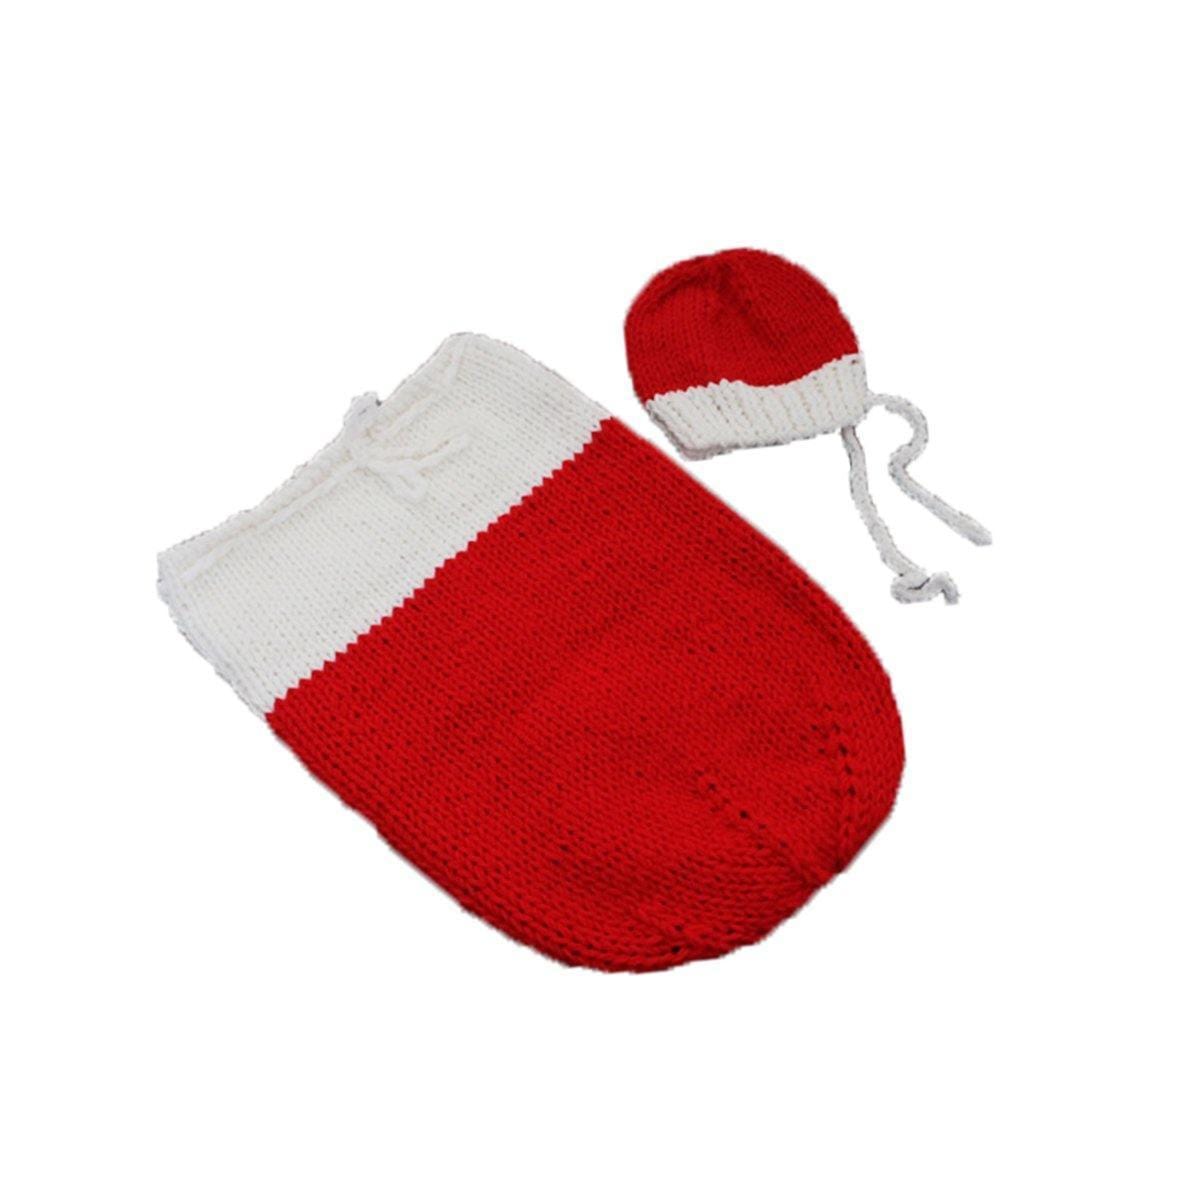 ezy2find baby clothing Red Newborn Baby Crochet Knit Costume Photography Photo Prop Snowman Hat Cap Set Christmas Gift